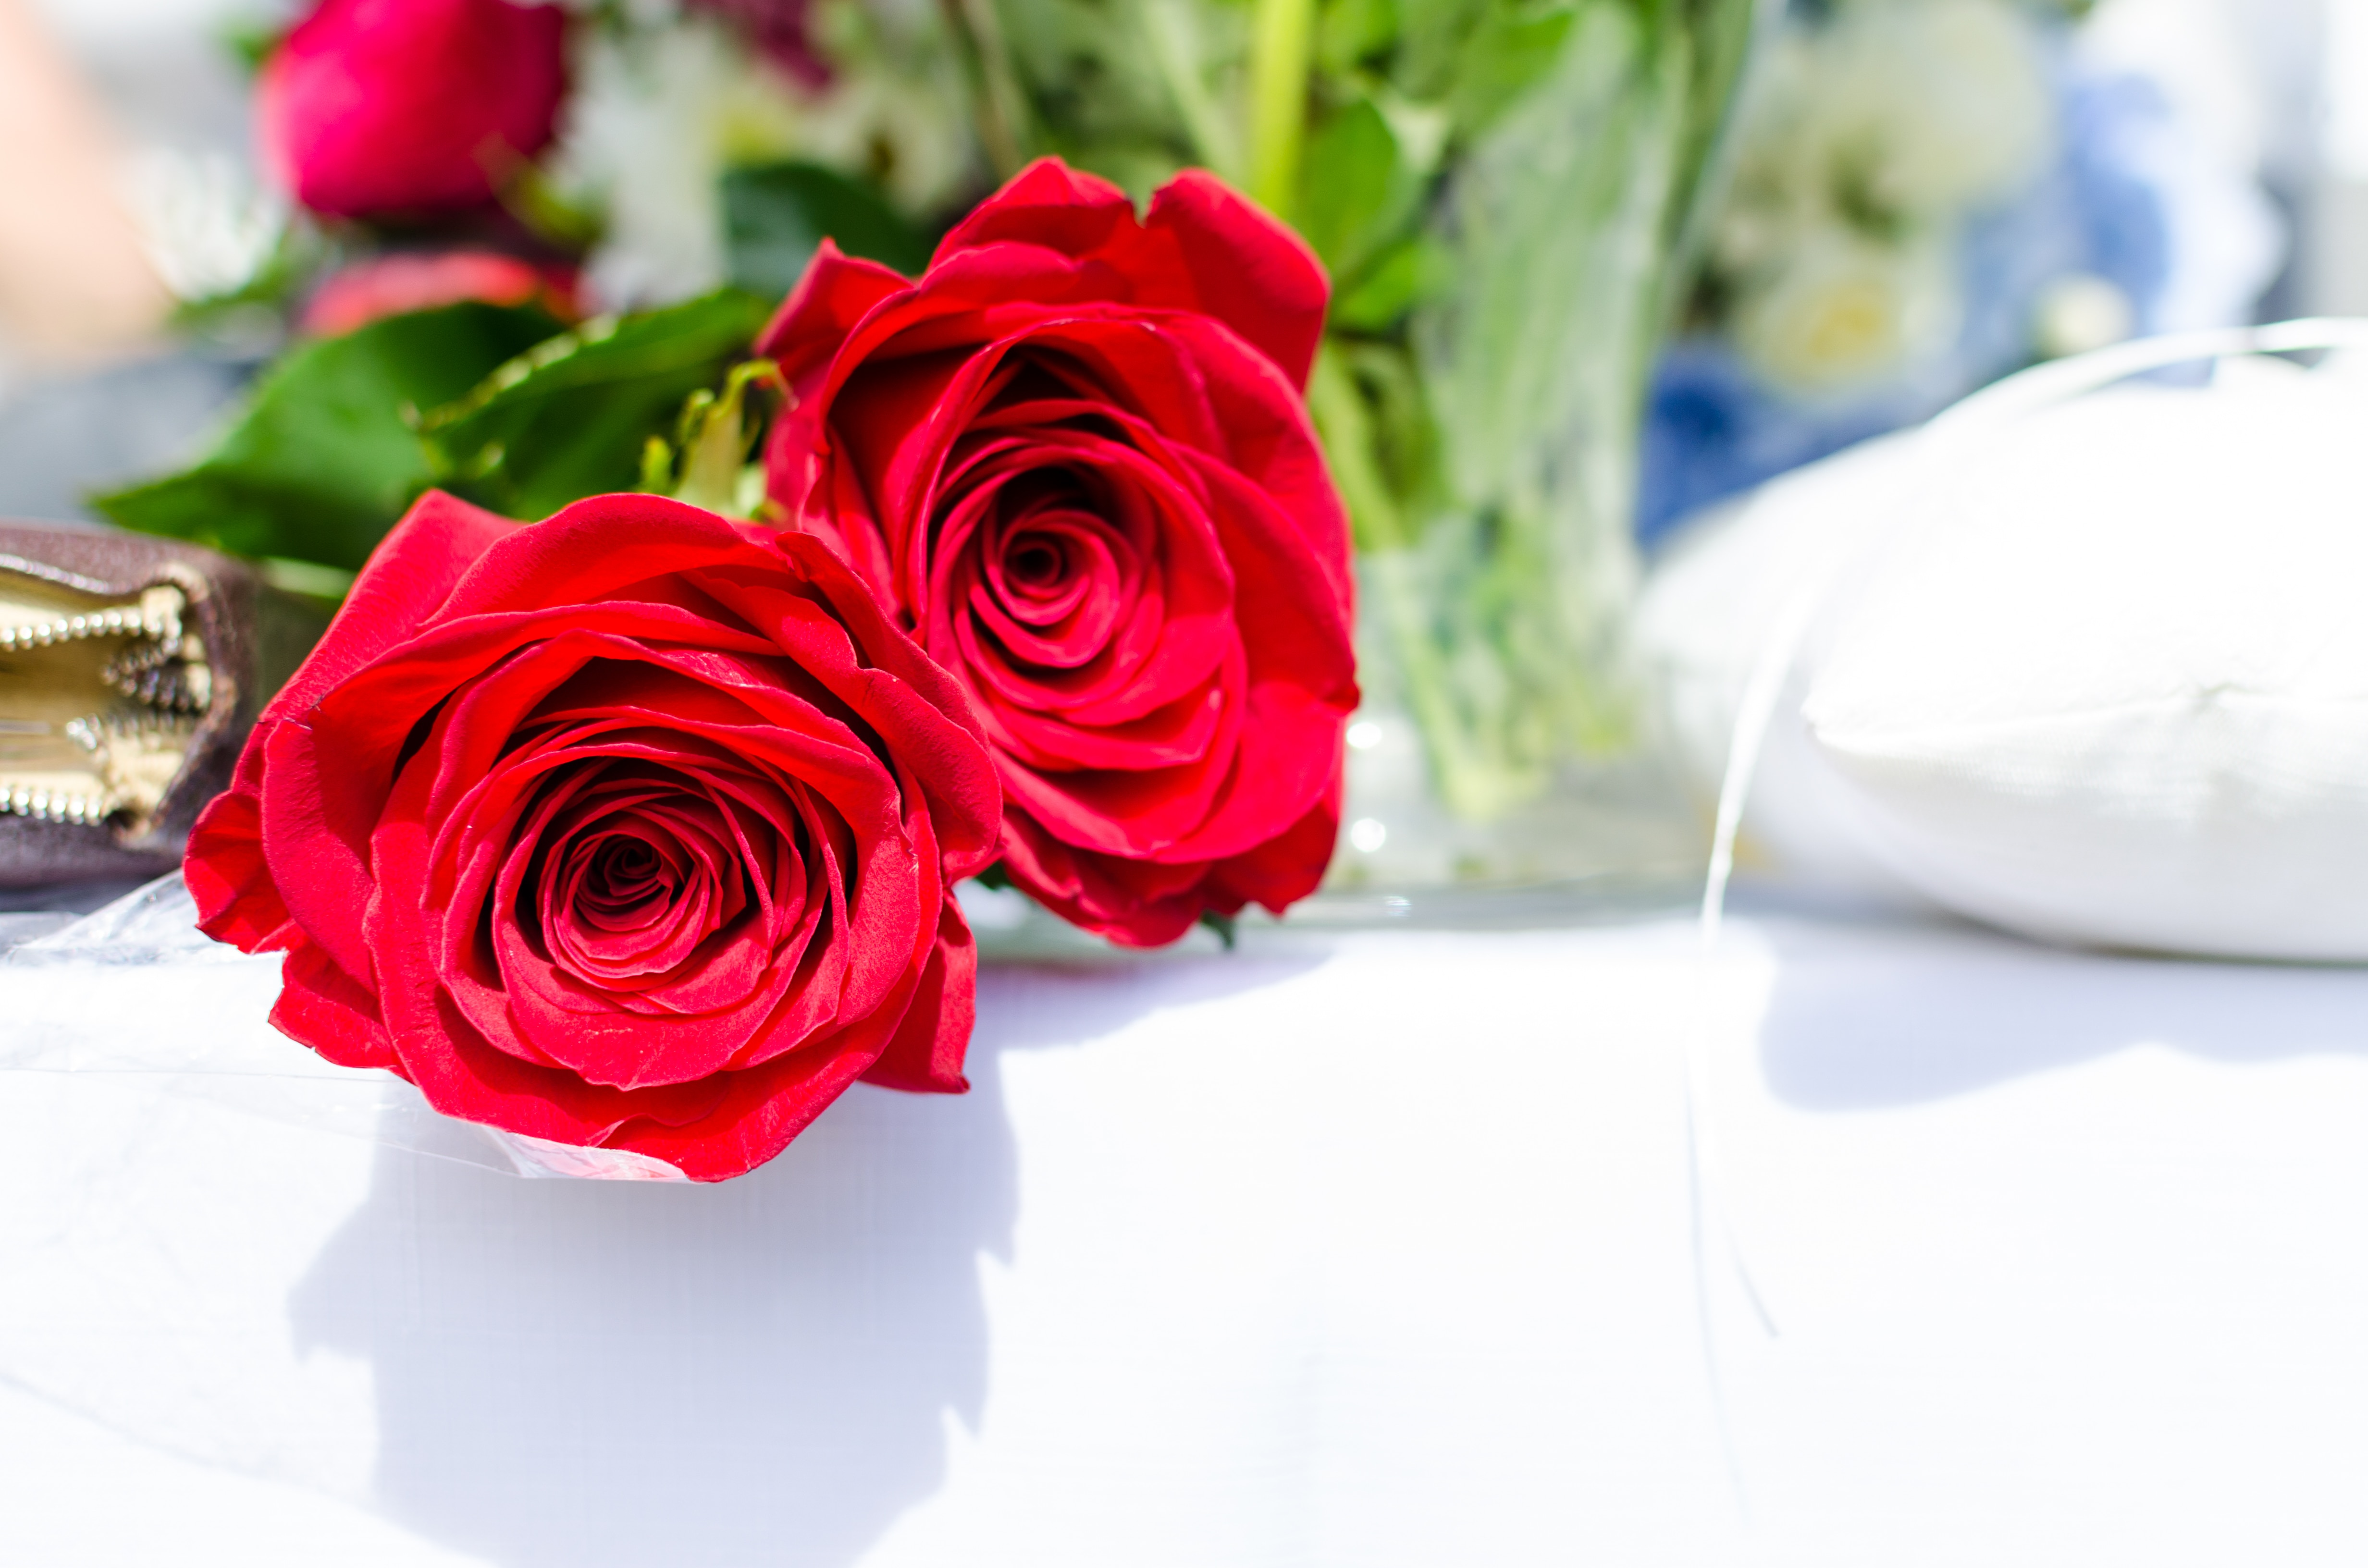 two red roses on white surface